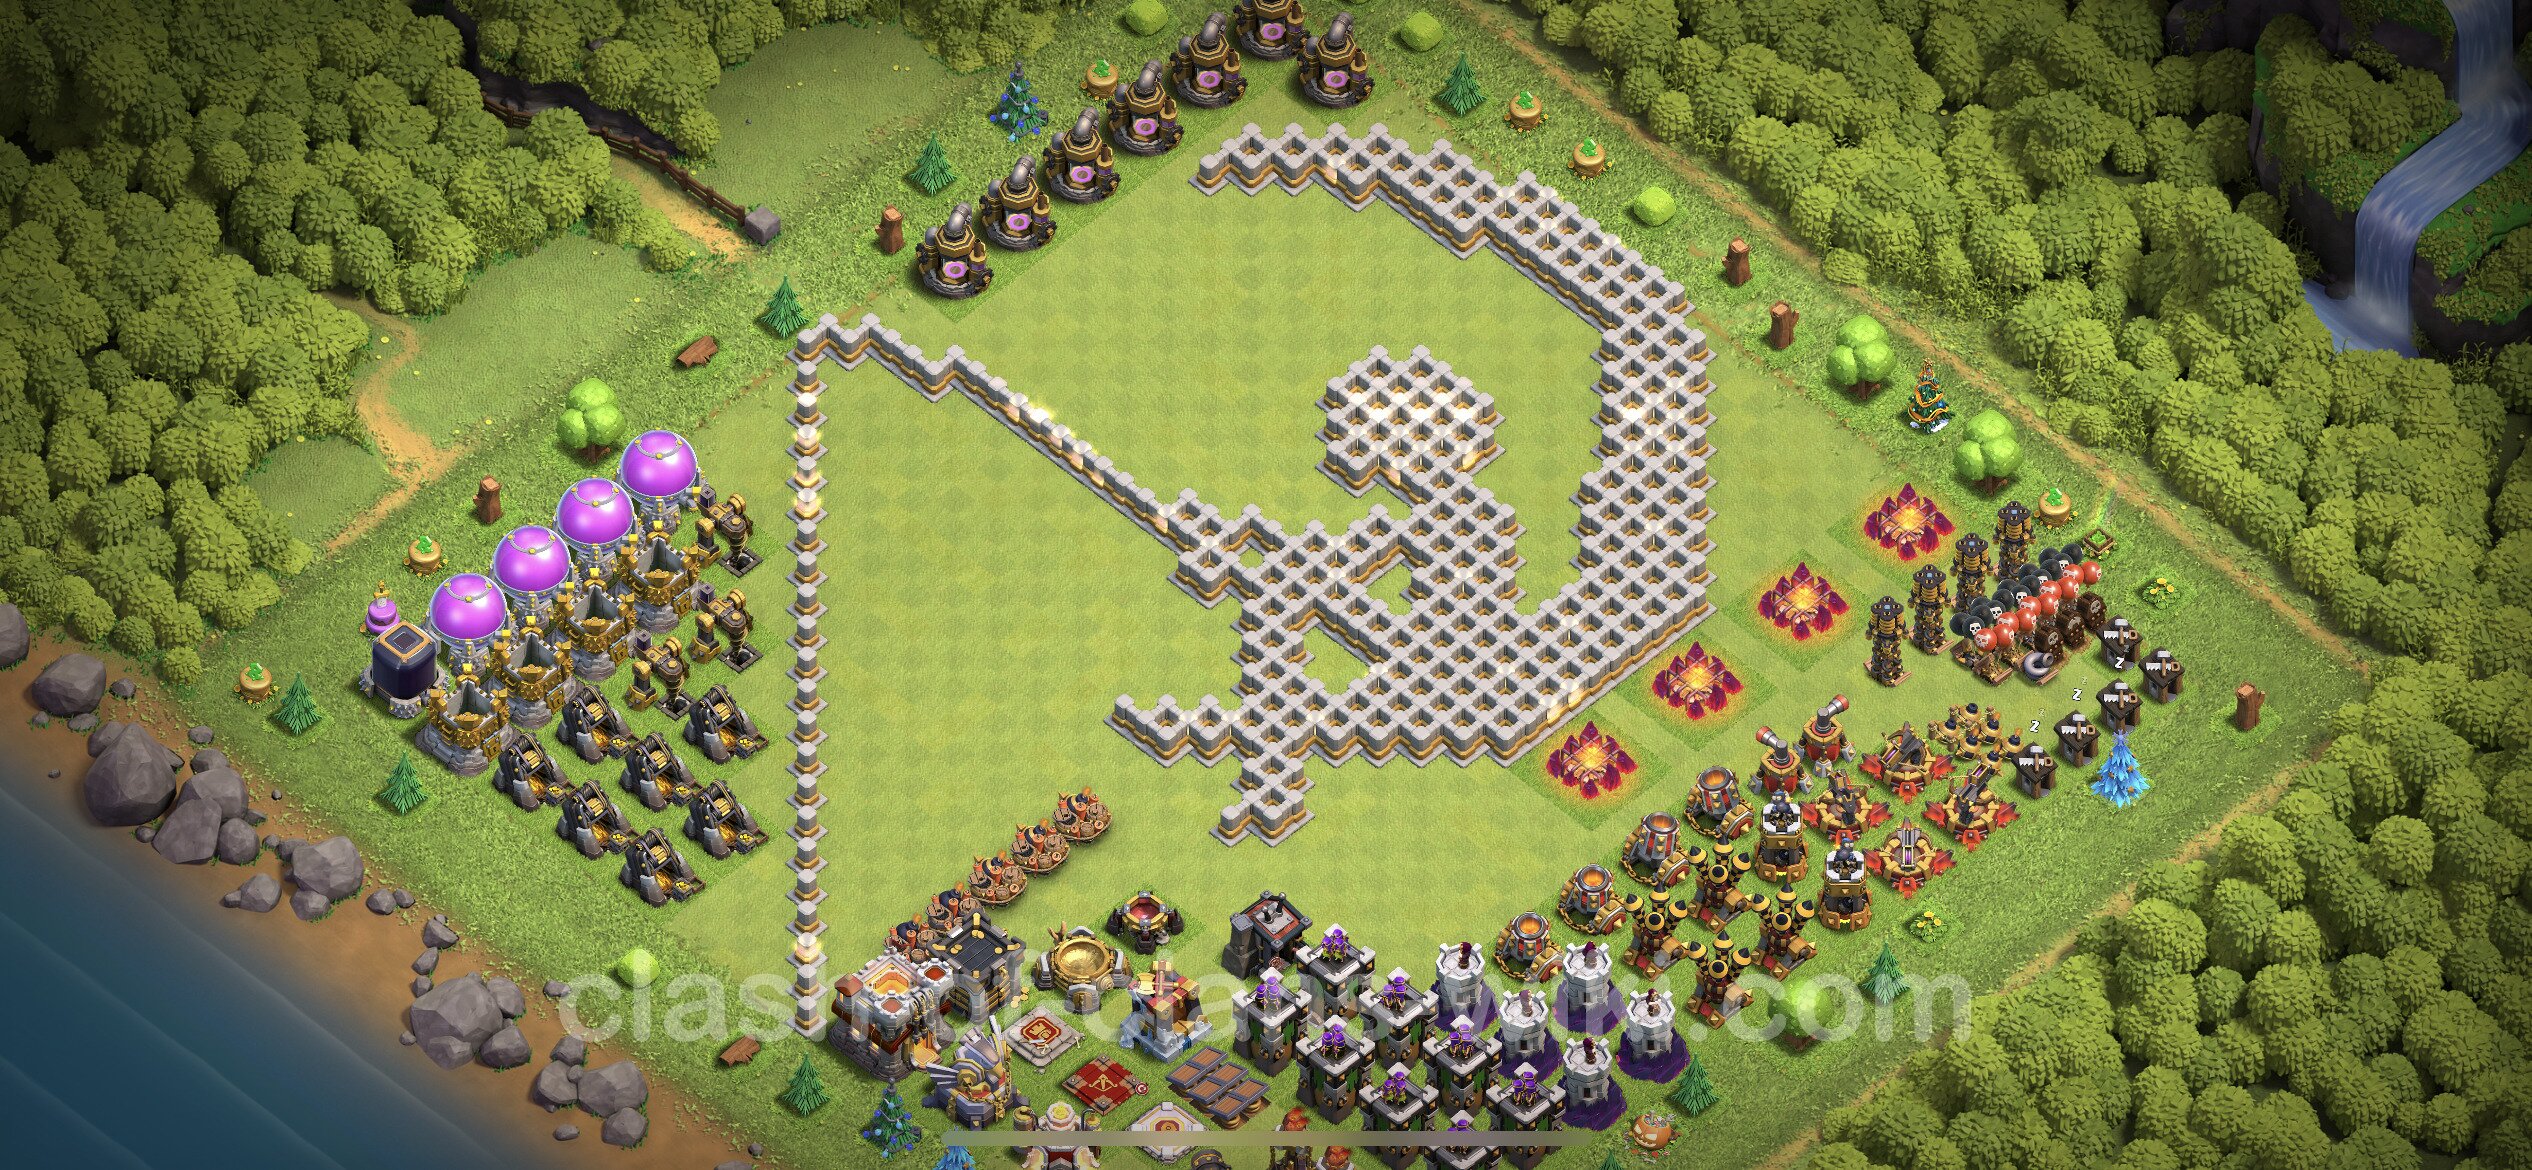 Funny Troll Base TH188 with Link   Town Hall Level 188 Art Base Copy, 18